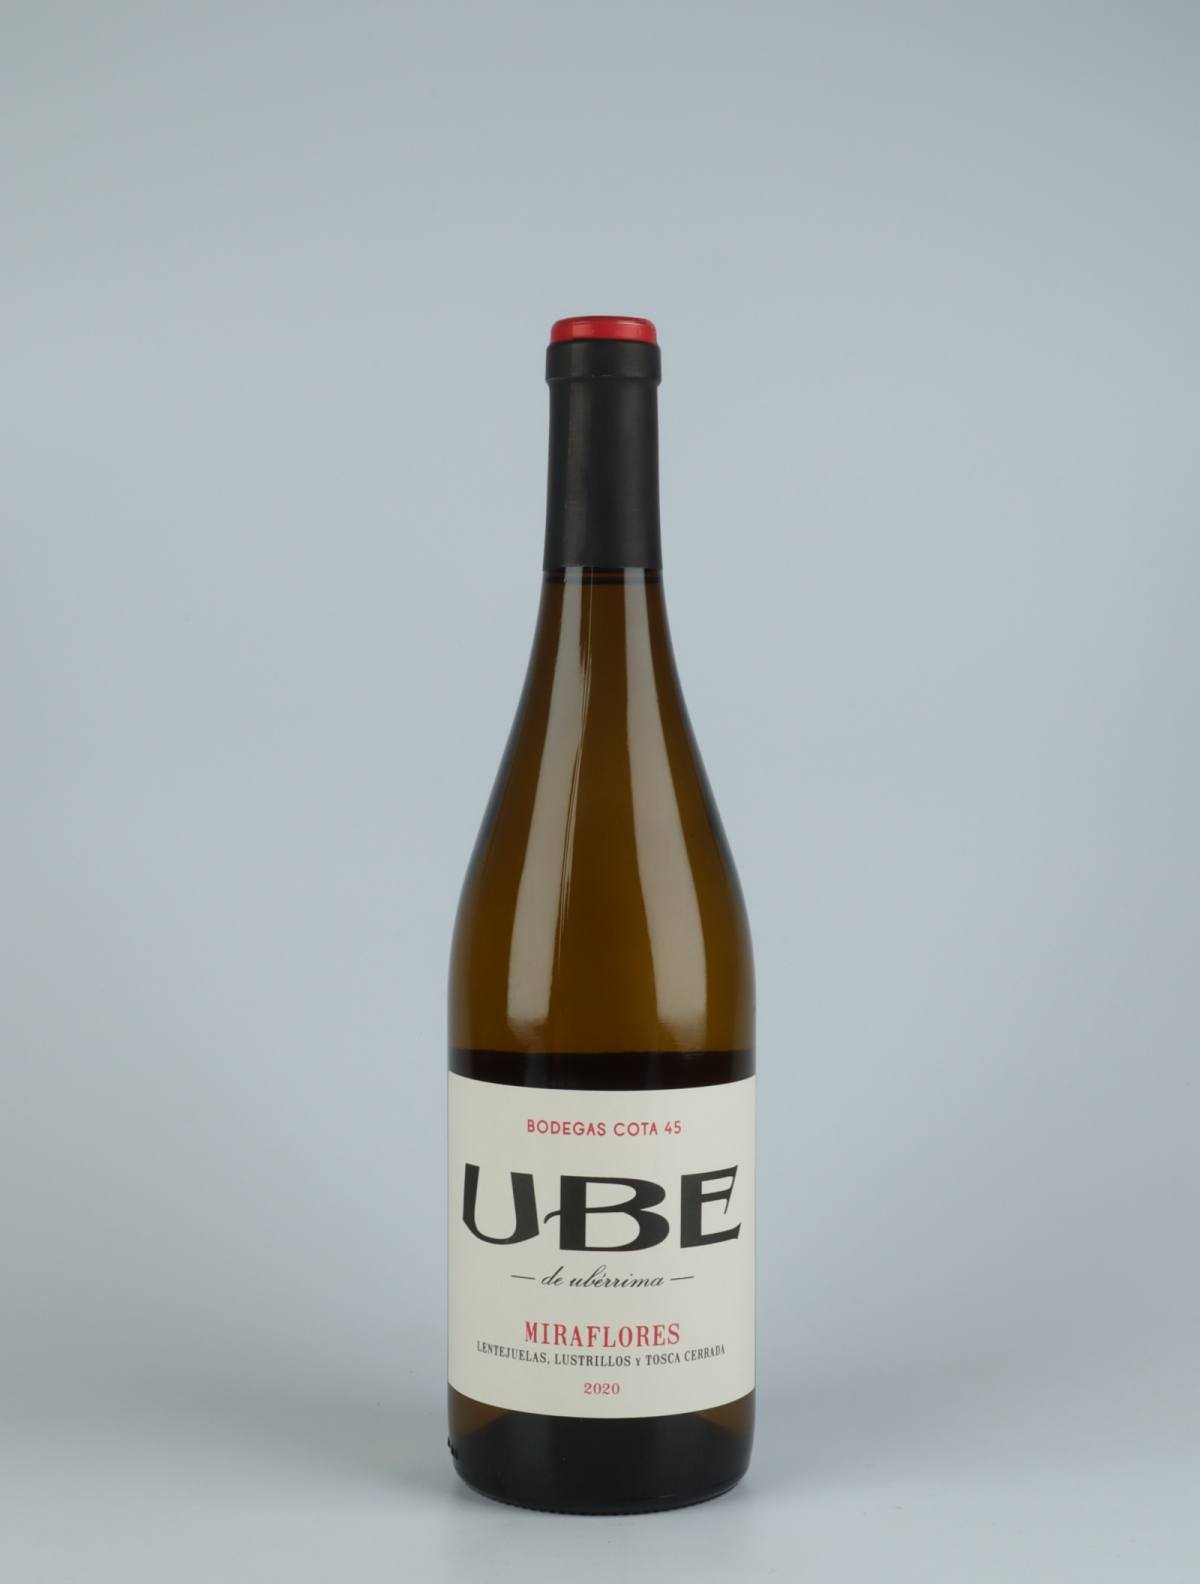 A bottle 2020 UBE Miraflores White wine from , Andalucia in Spain